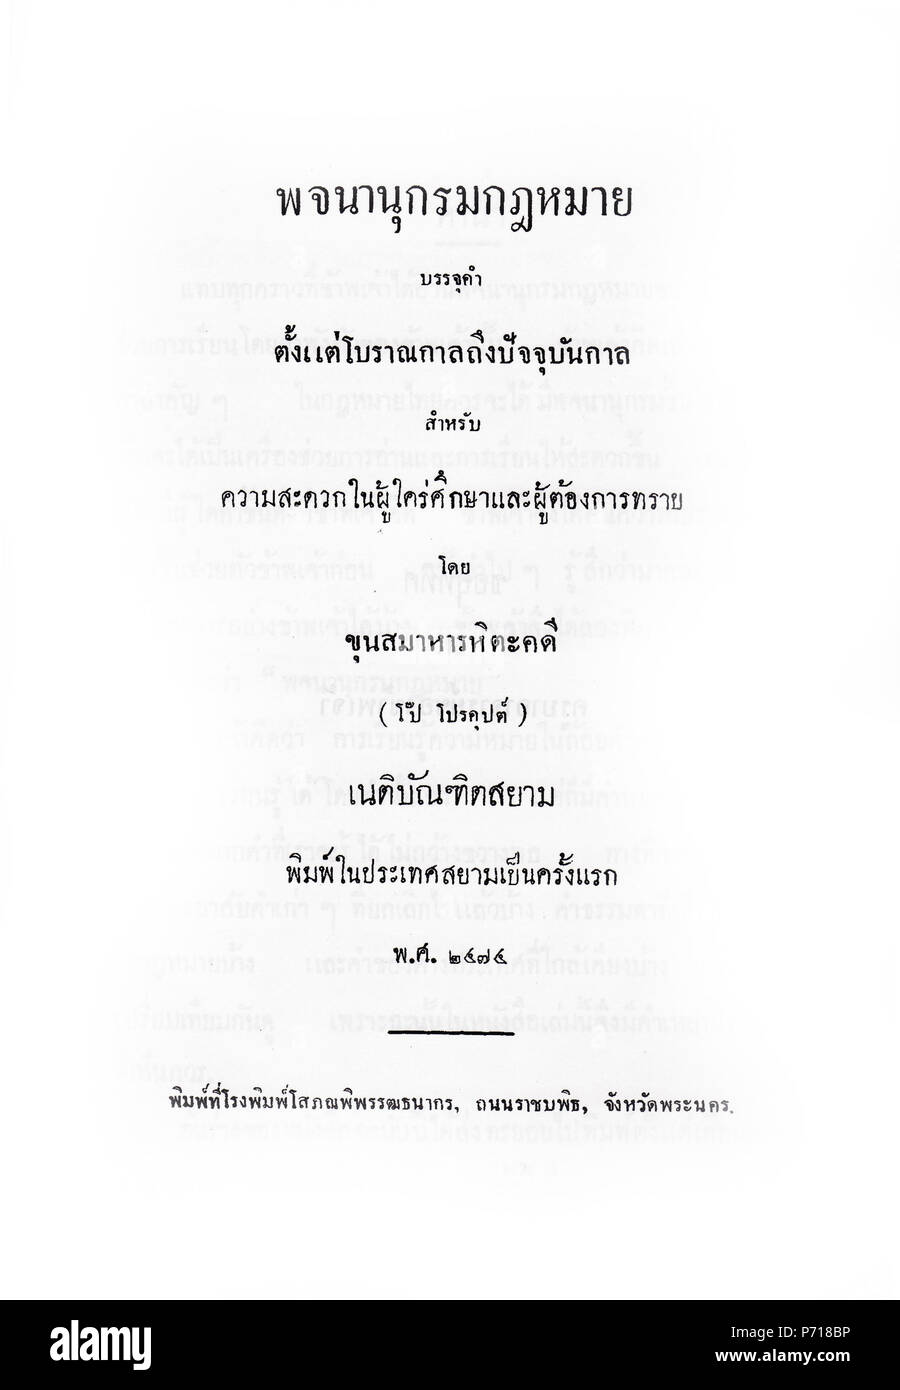 English: What: Cover of the Siamese Law Dictionary by Khun Samahanhitakhadi (Po Porakhup), reading: 'The Law Dictionary containing legal terms from ancient times to the present time, ready for those who takes interest in studying and desires the knowledge about law, by Khun Samahanhitakhadi (Po Porakhup), Siamese Bar Association Member, Printed in Siam for the first time in BE 2474 (1931).' Where: The file is scanned from: Khun Samahanhitakhadi (Po Porakhup). (2006). Law Dictionary. (2nd Edition). Bangkok : Winyuchon Publishing House. ISBN 9742883653. : :     ( ) : '     ( )   .. ' :  :  ( ).  Stock Photo